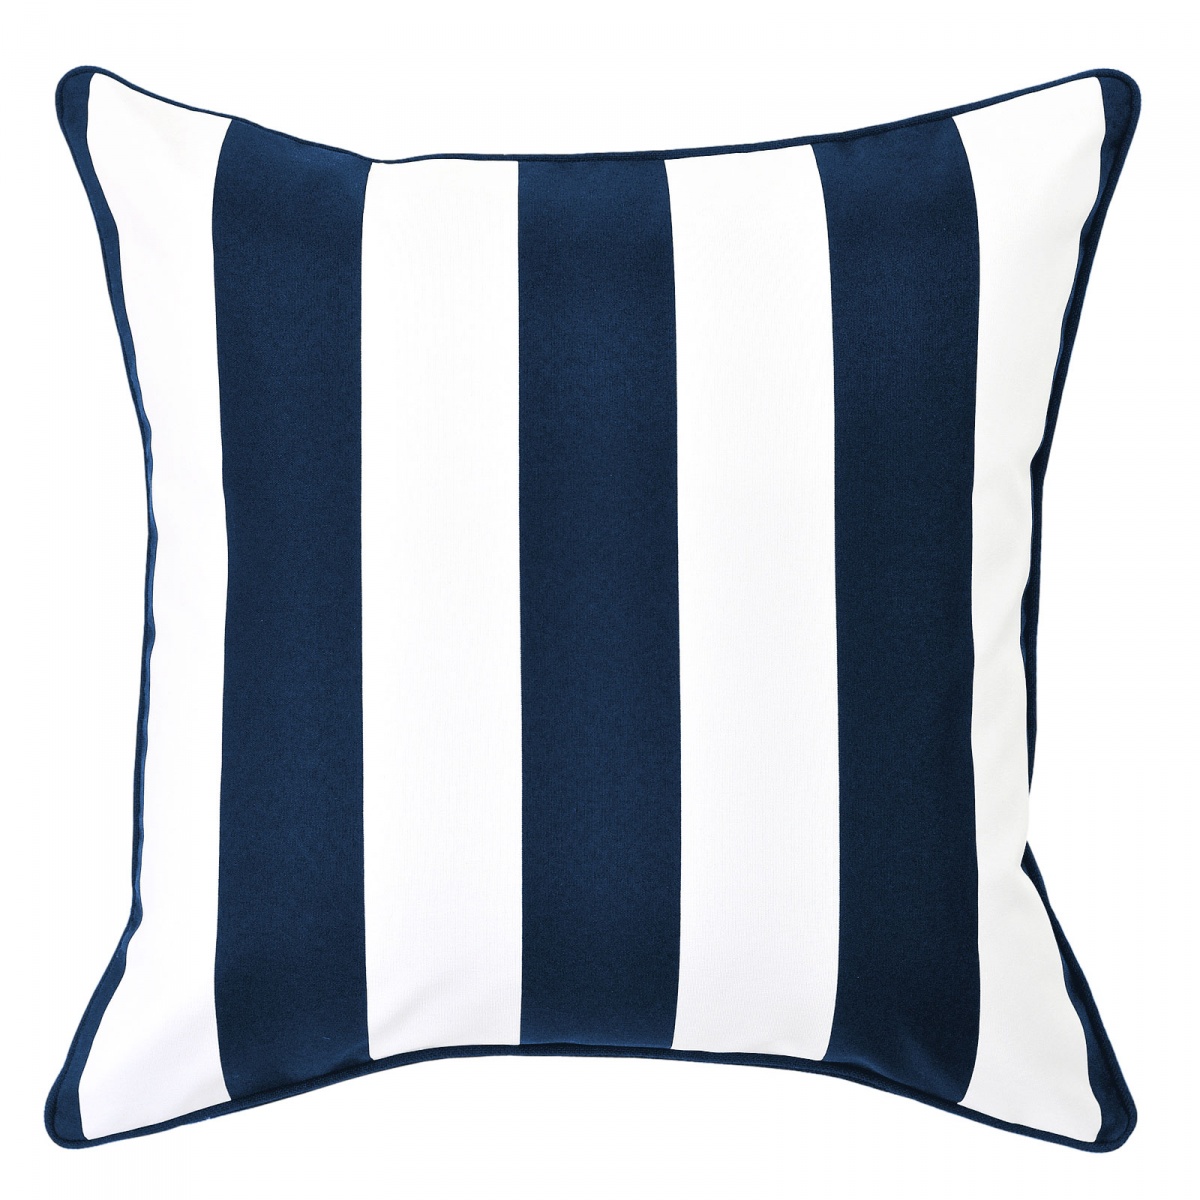 Mallacoota Marine Outdoor Cushion with Navy Piping - 50x50cm